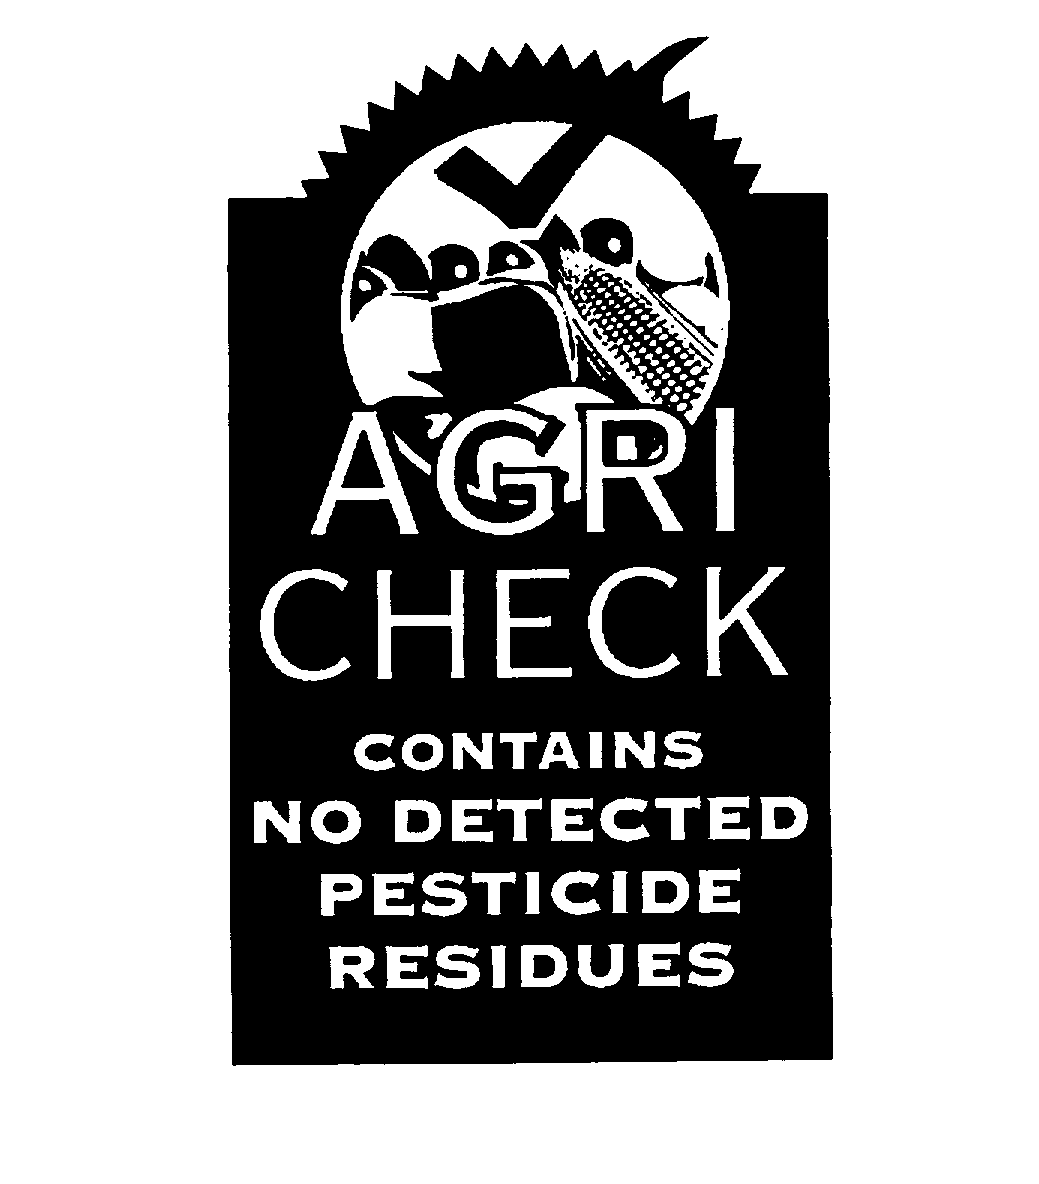  AGRI CHECK CONTAINS NO DETECTED PESTICIDE RESIDUES